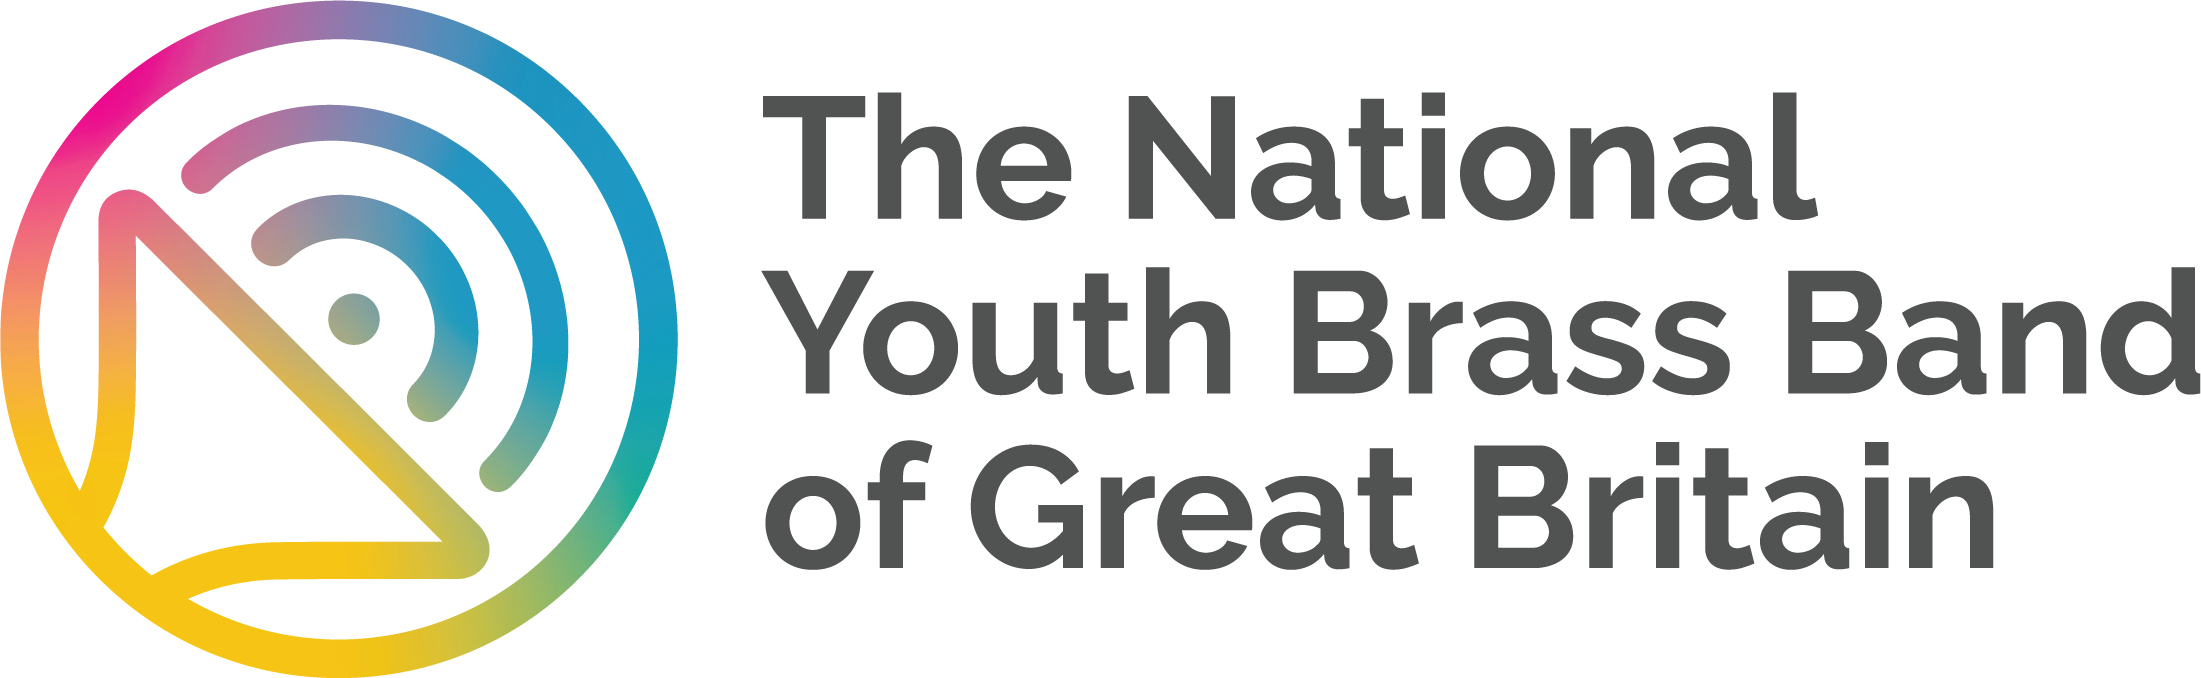 National Youth Brass Band of Great Britain logo